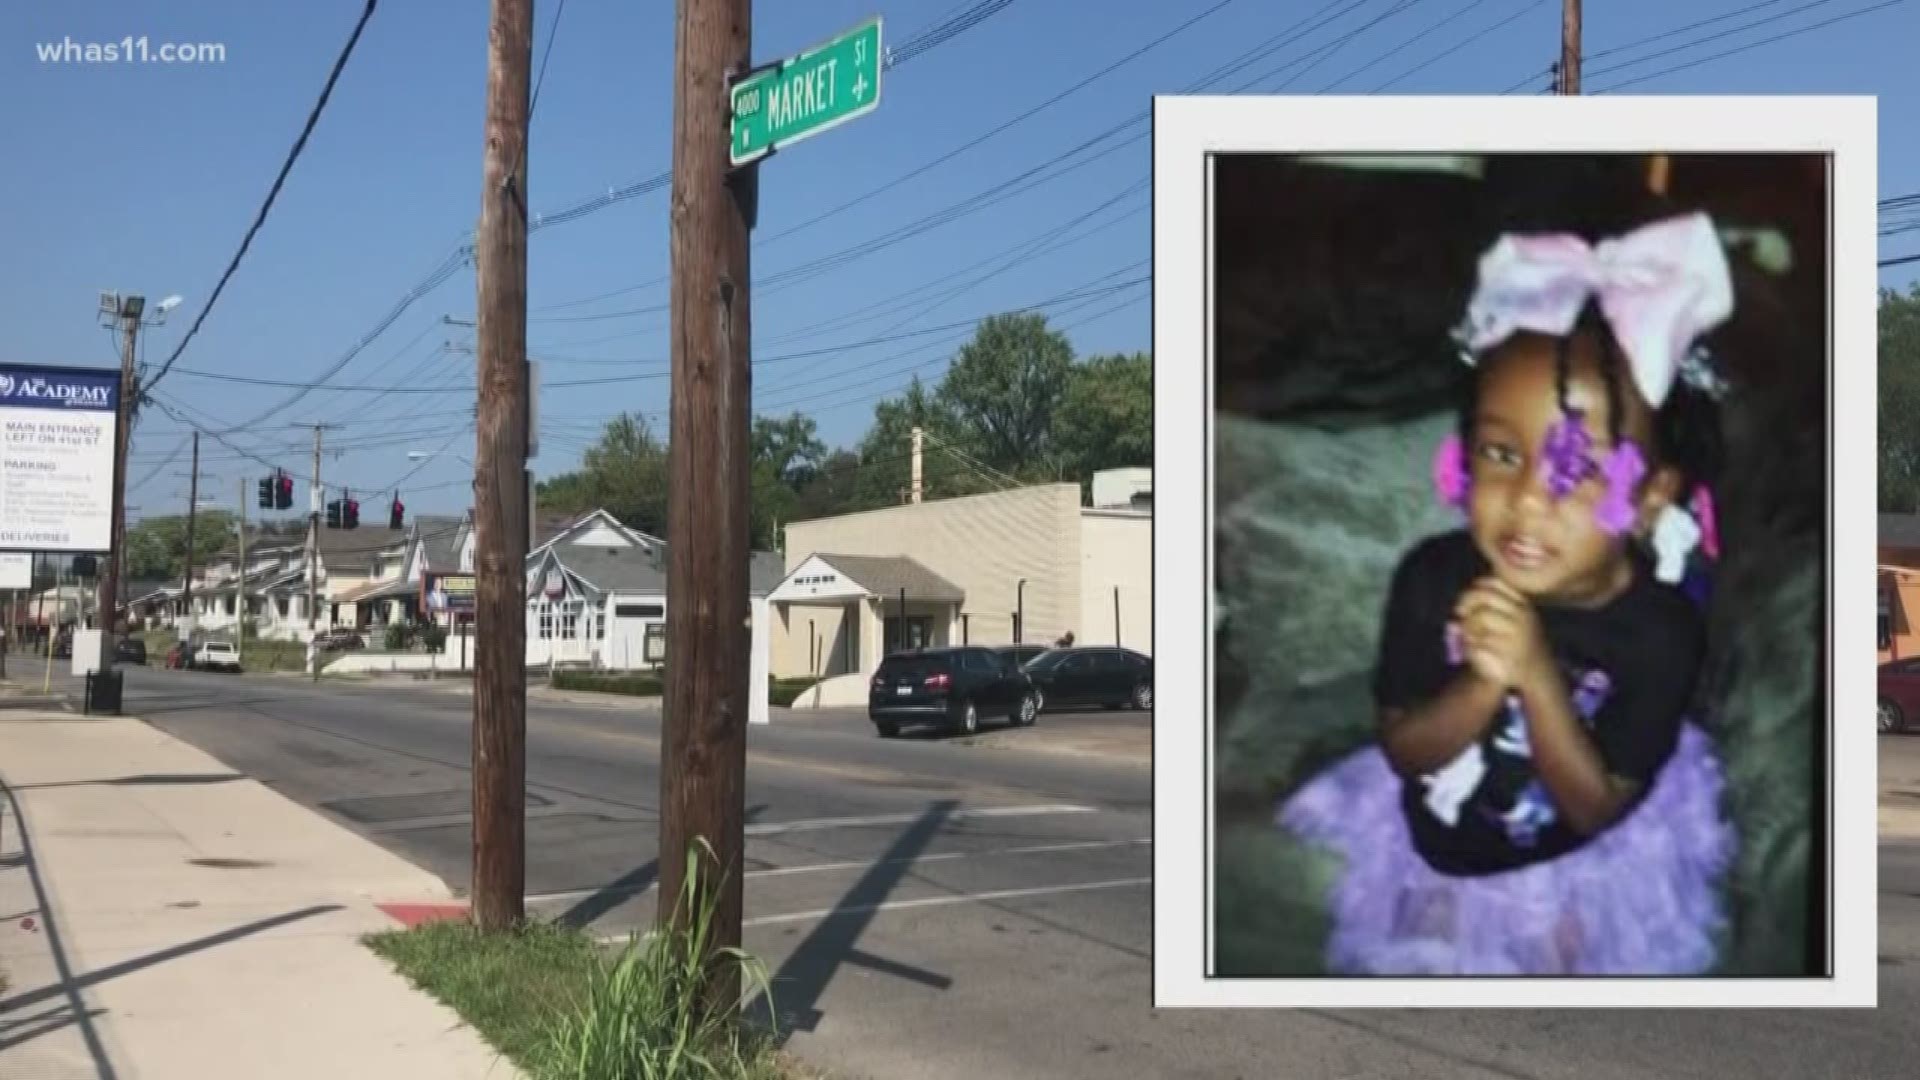 The surveillance video appears to show 4-year-old, Lyric Rushin walking and following behind an unknown person. Police believe the little girl wandered out on her own after she was last seen at her house on 27th and Elliot around 1 a.m. Monday.